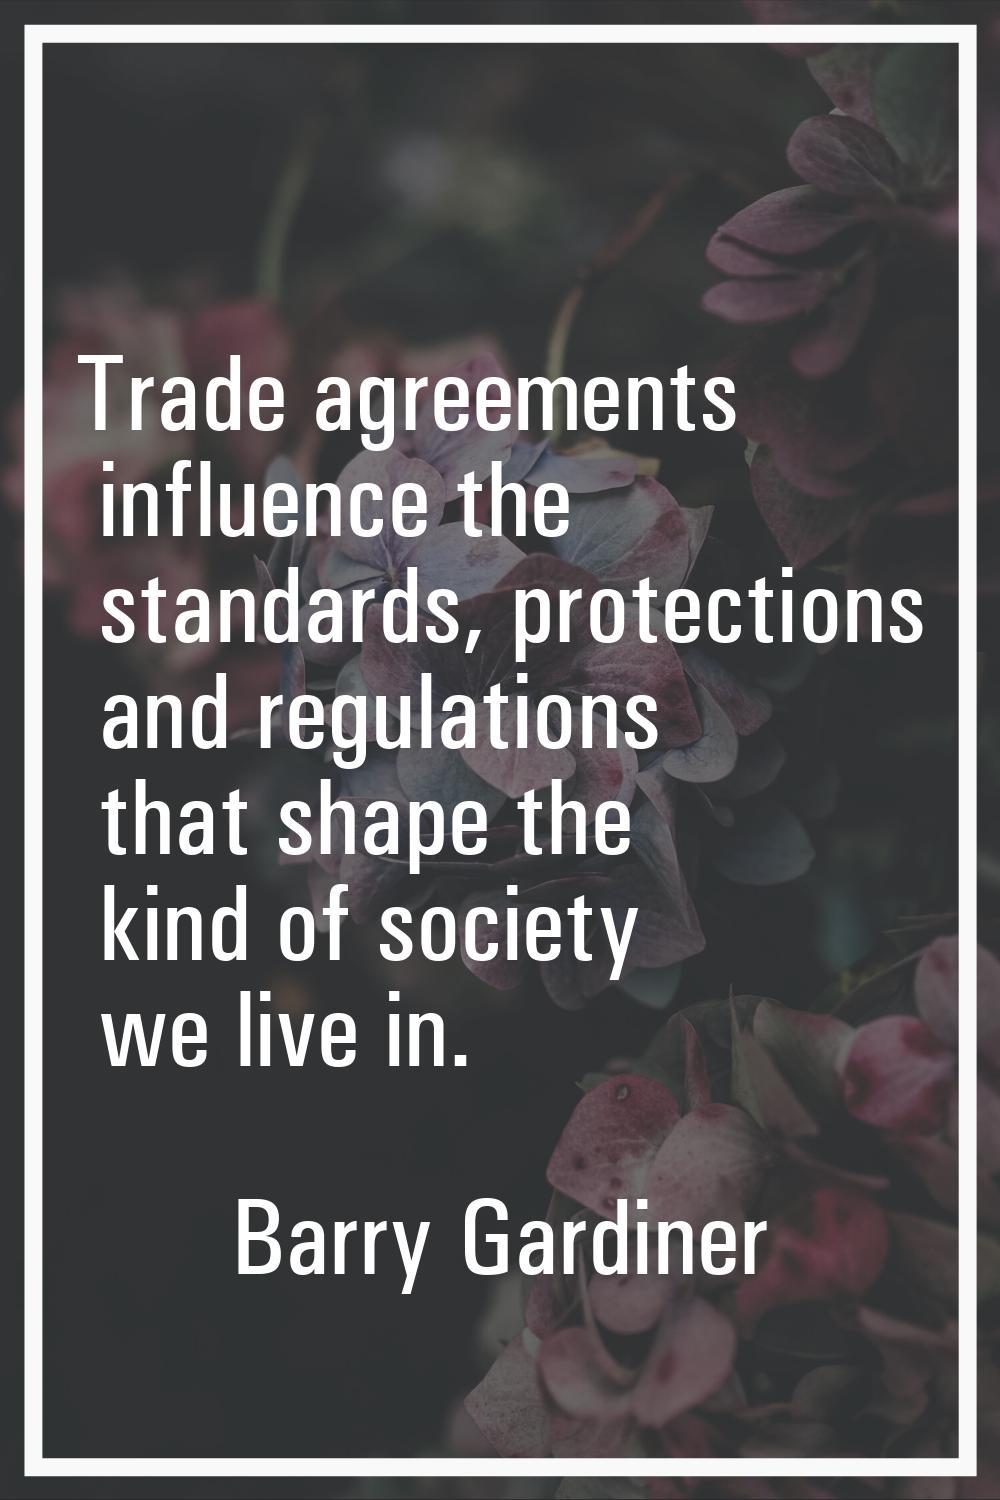 Trade agreements influence the standards, protections and regulations that shape the kind of societ